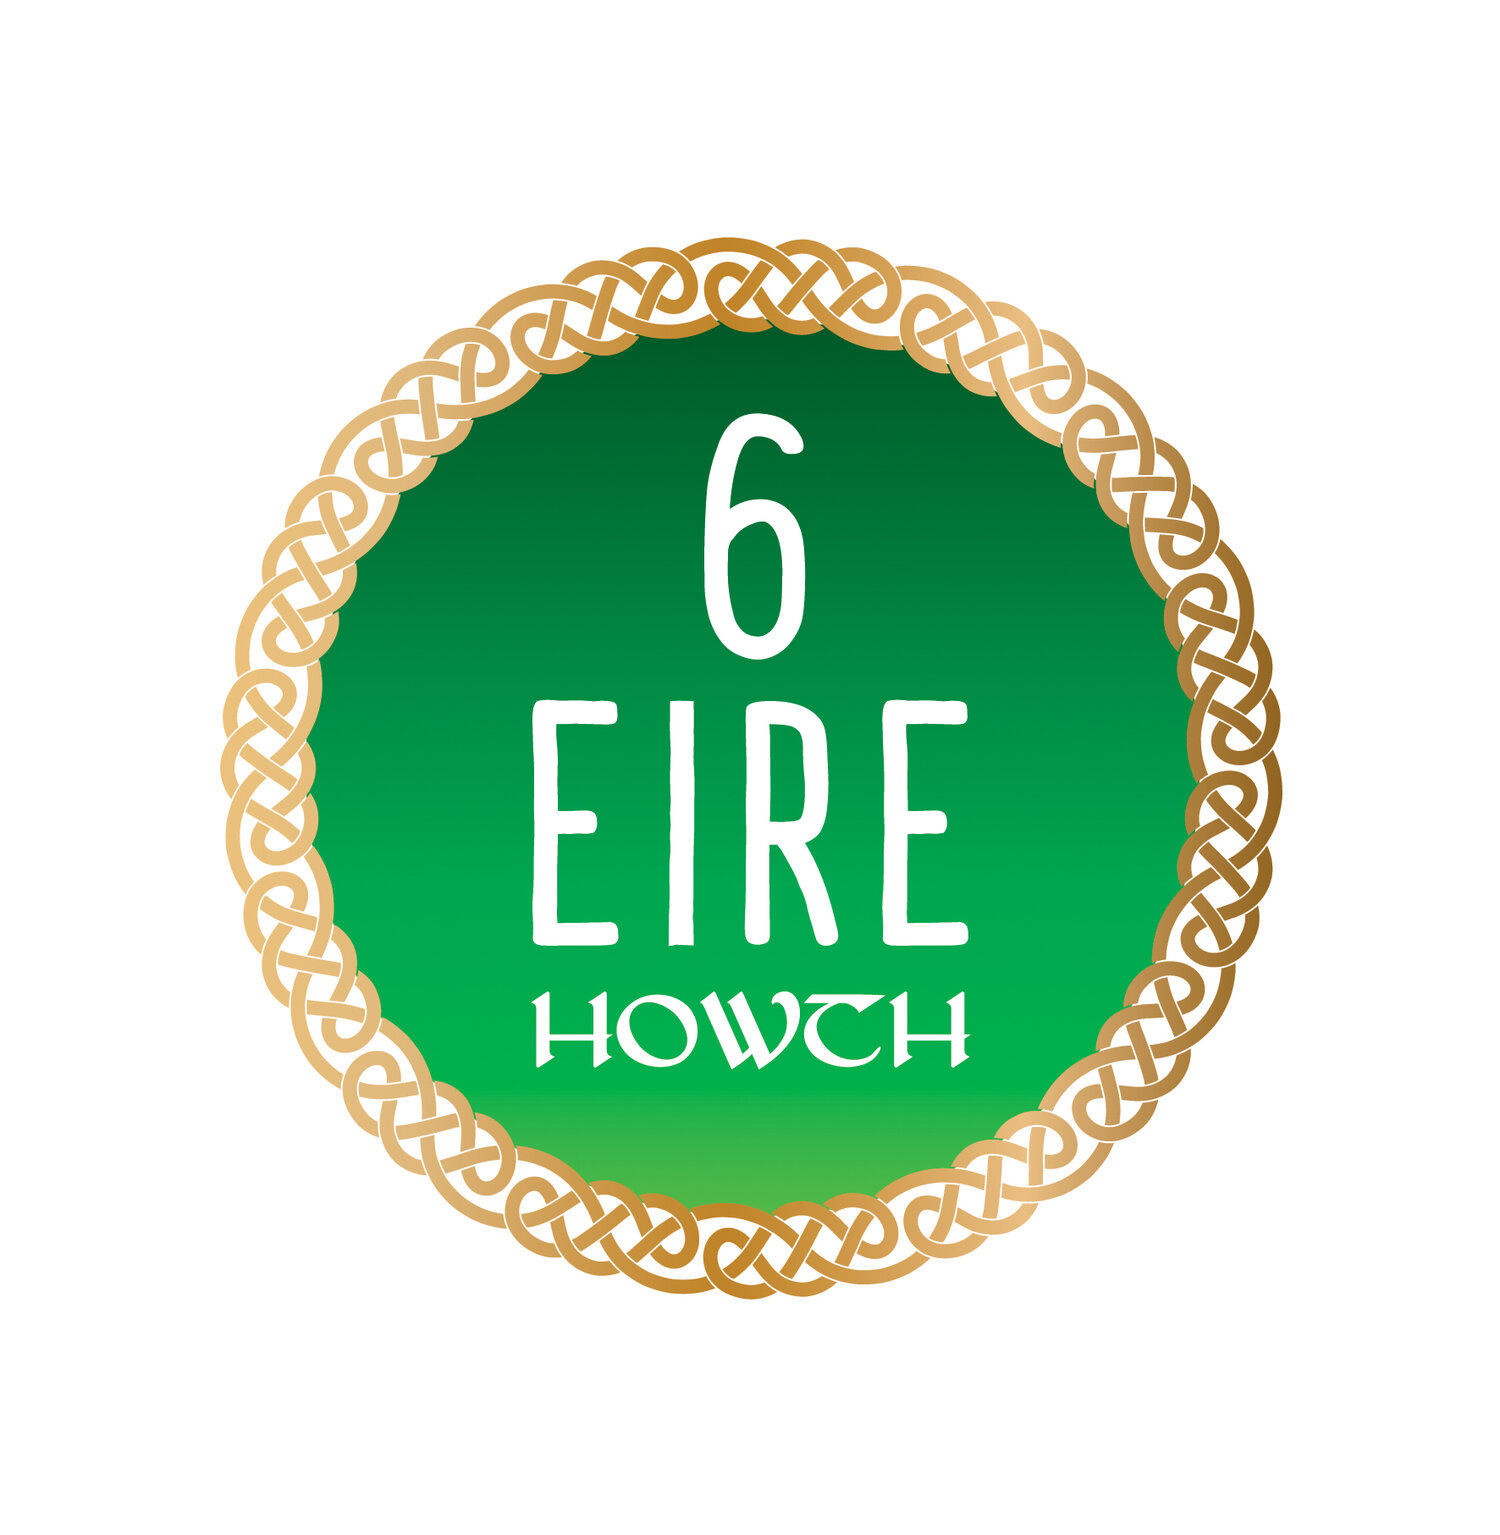 Howth Eire 6